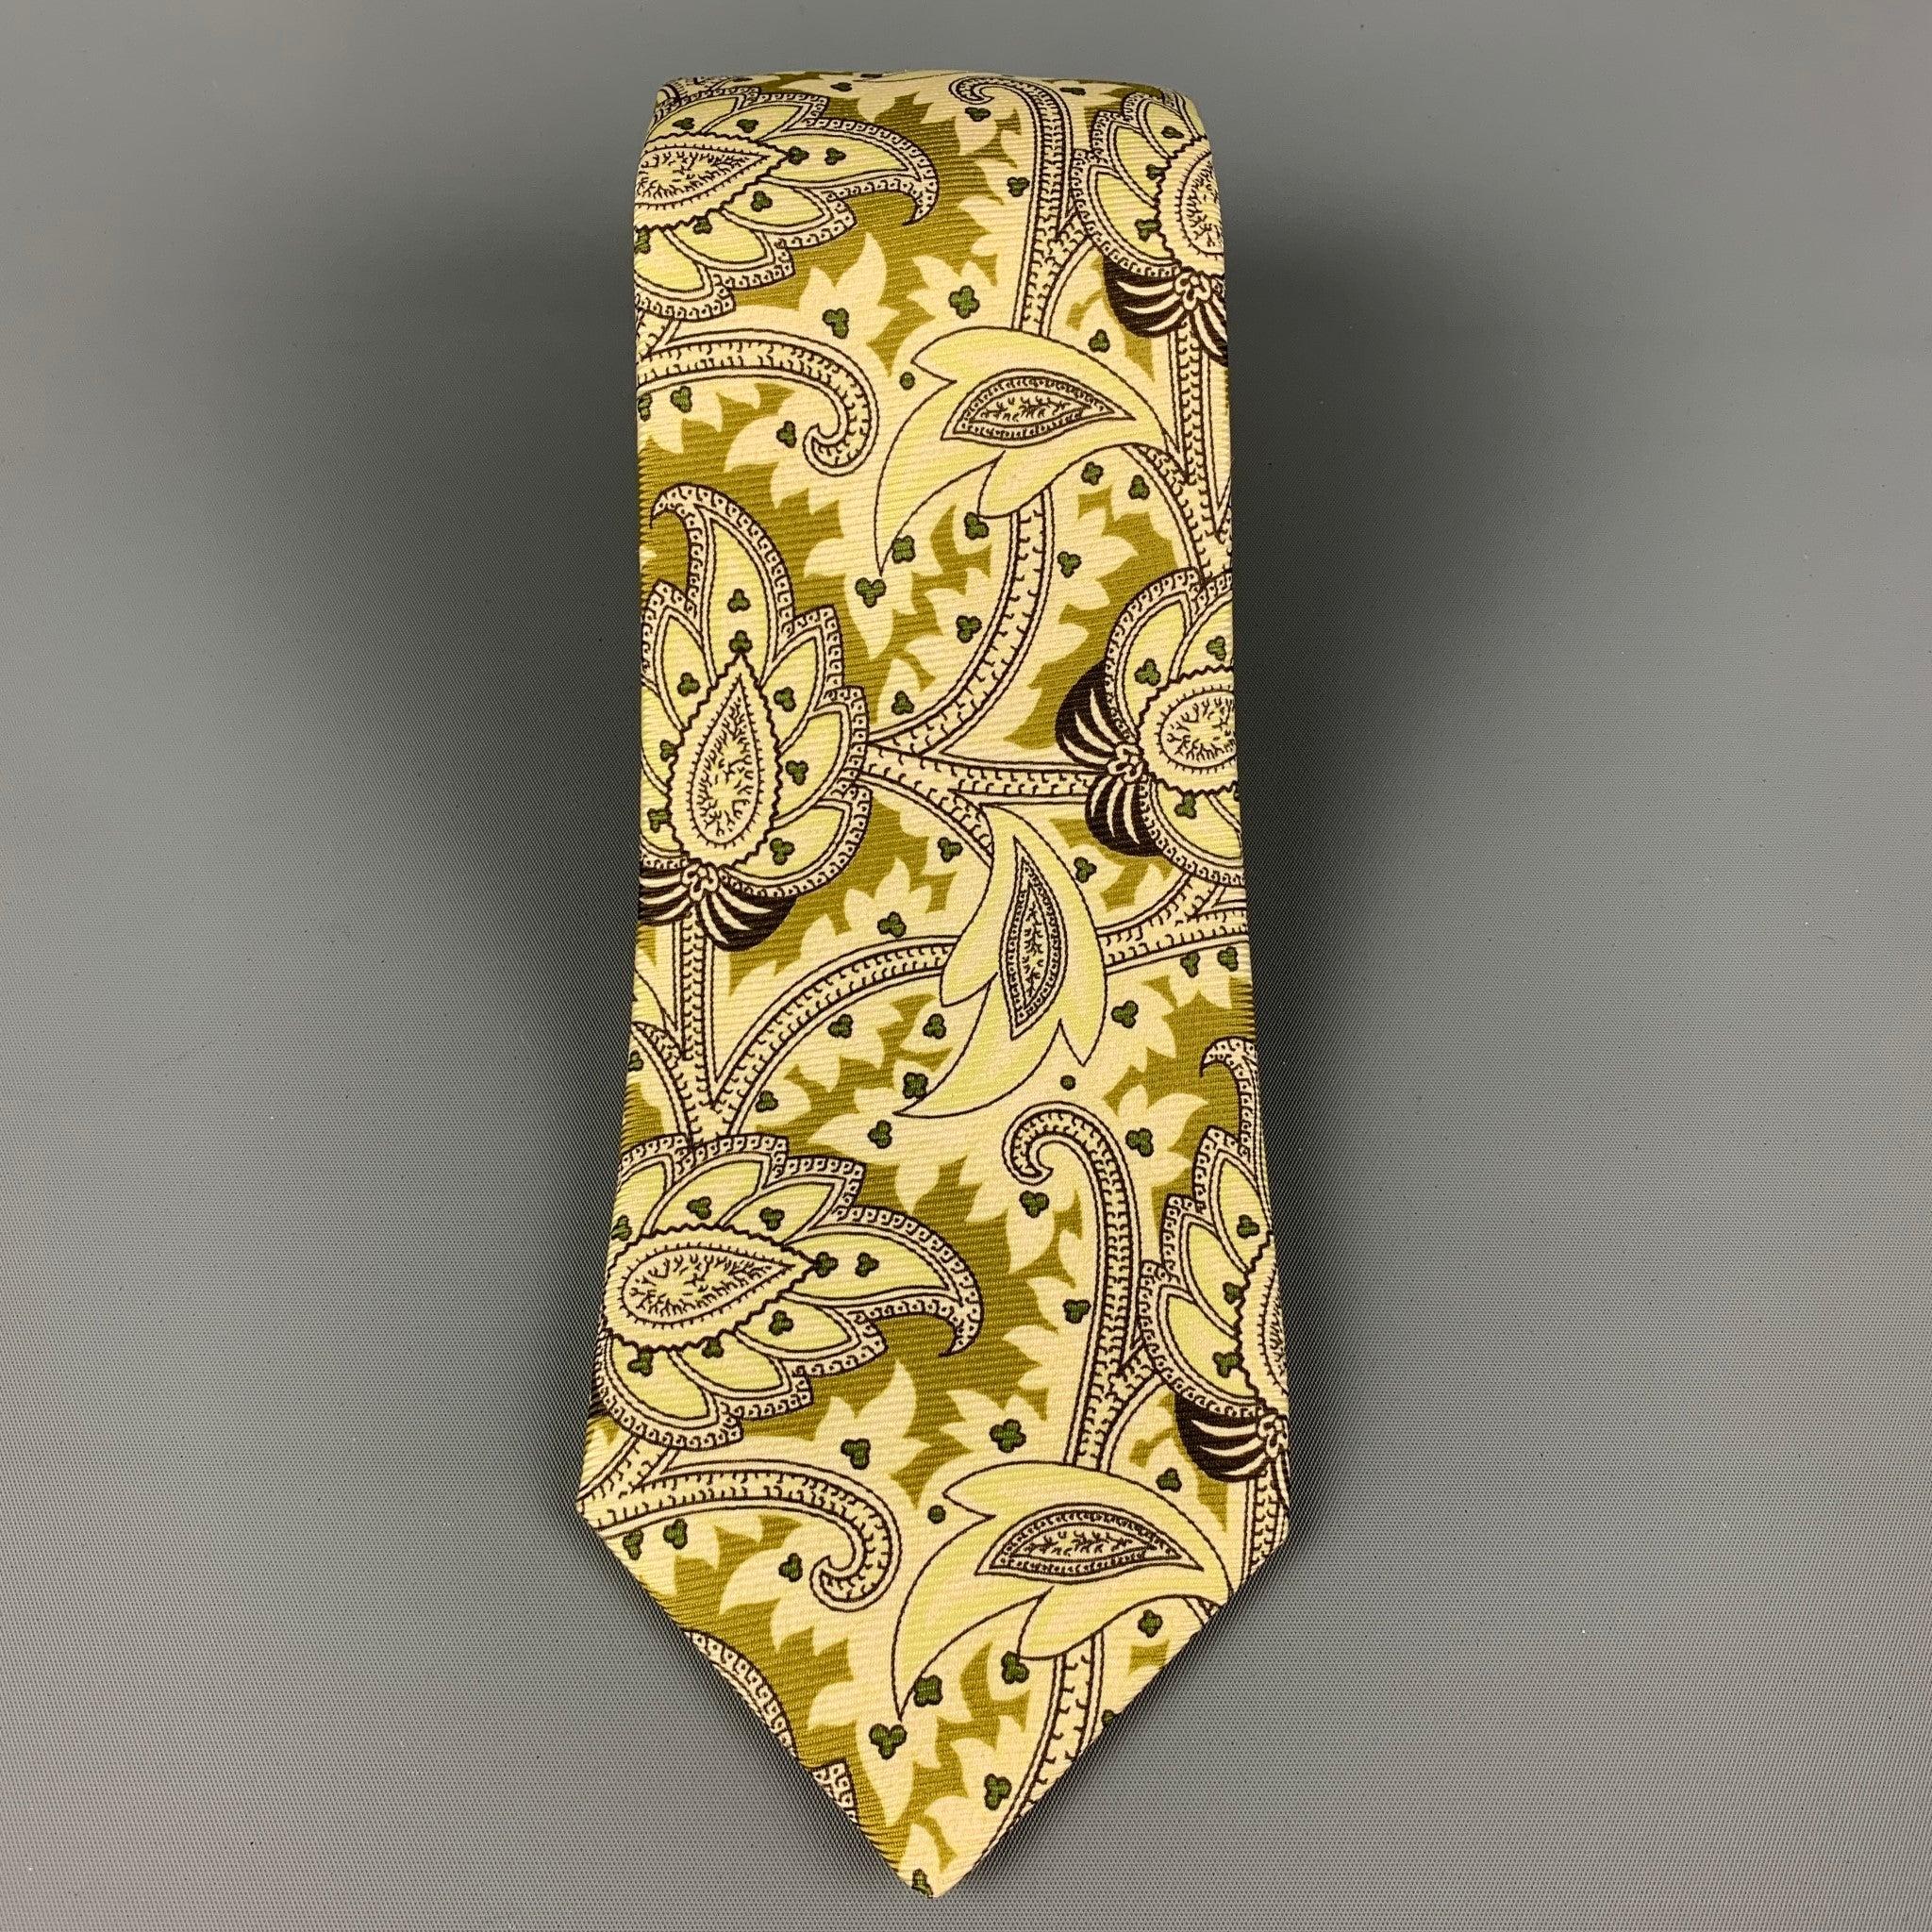 KITON necktie comes in a light green & olive silk with a all over paisley print. Made in Italy . Very Good Pre-Owned Condition.Width: 3.75 inches Length: 60 inches 
  
  
  
 Sui Generis Reference: 120395
 Category: Tie
 More Details
  
 Brand: